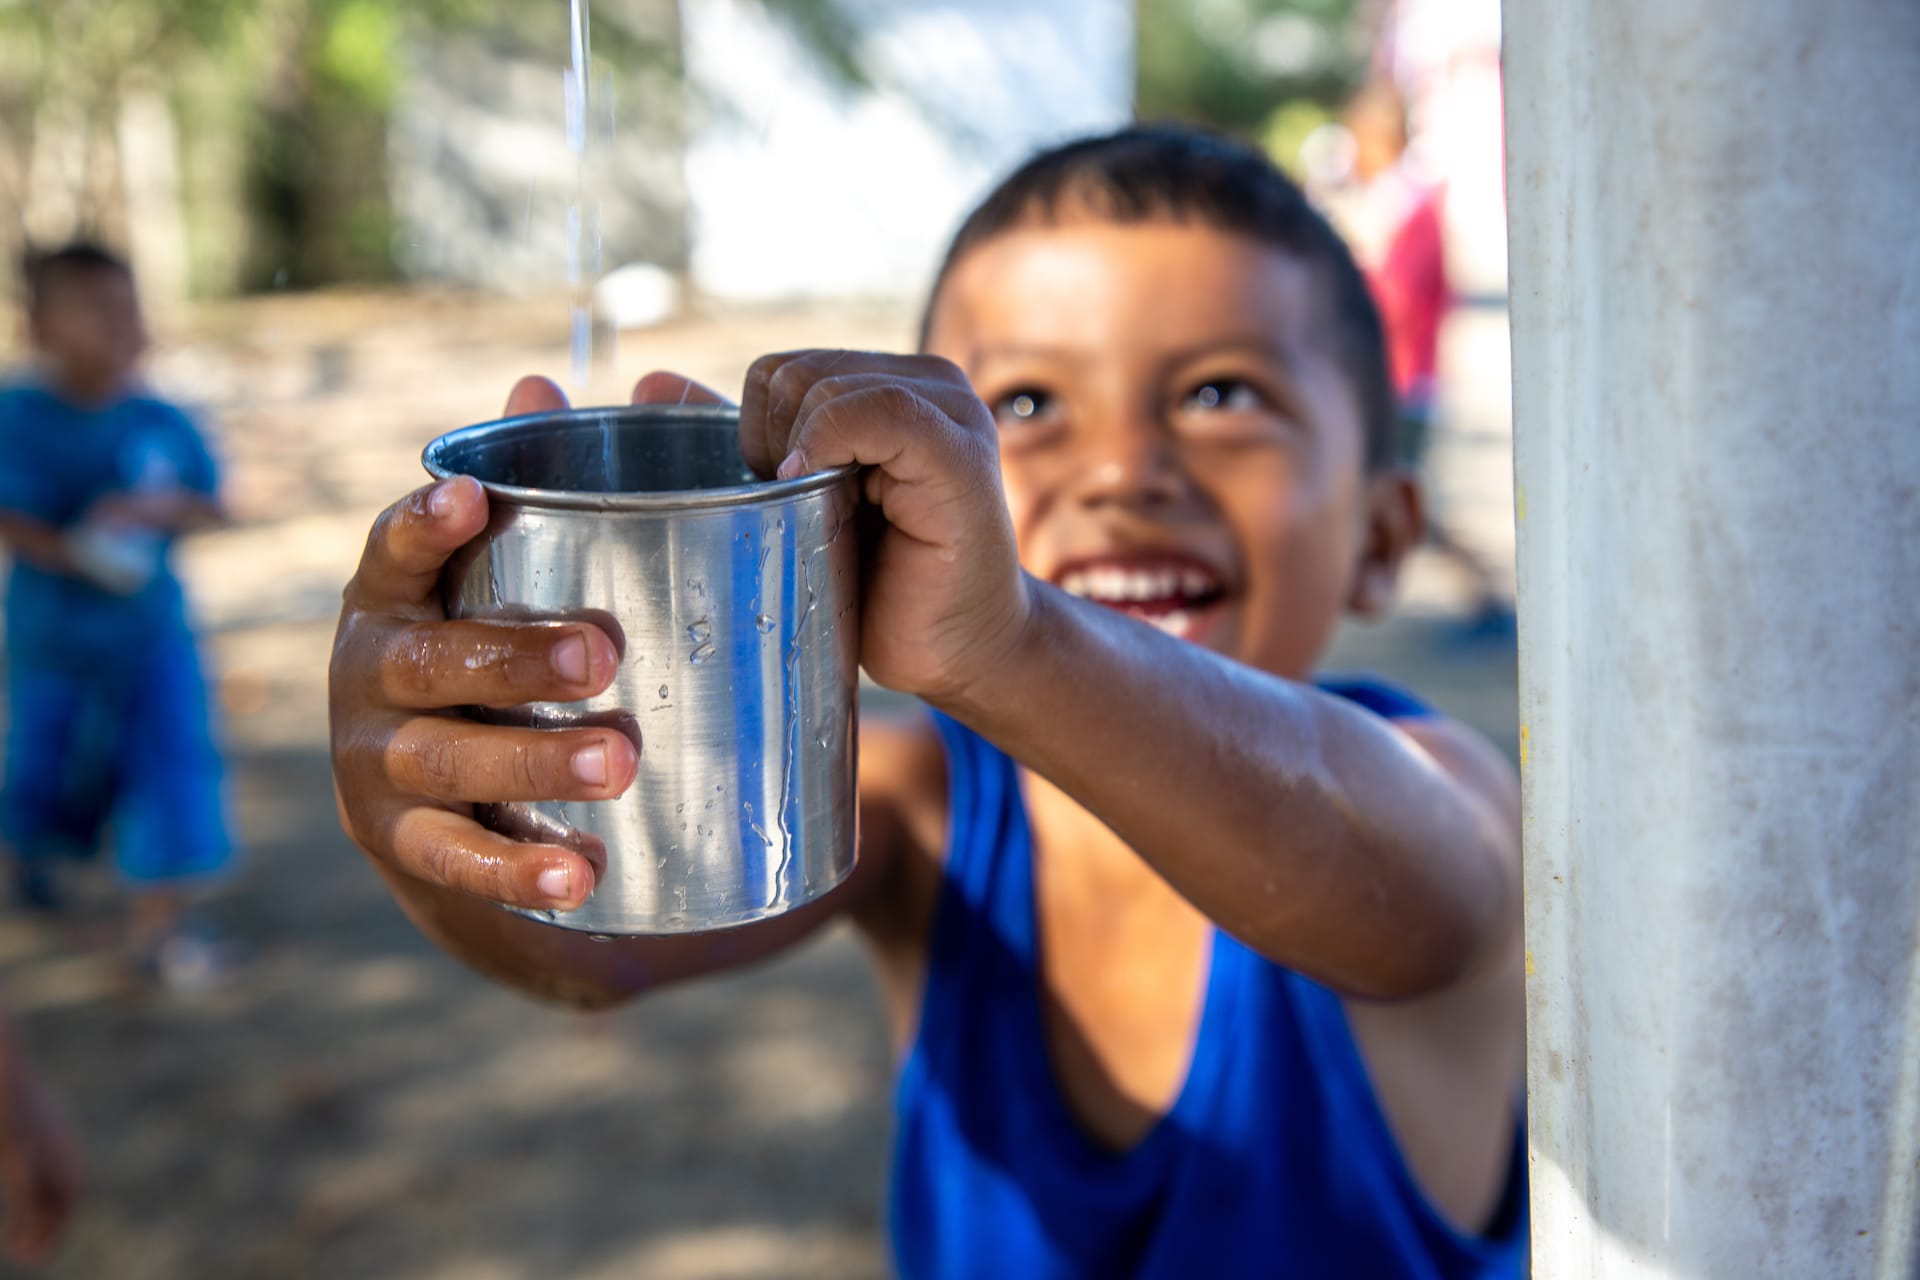 A young boy, Jimmy, reaches out to fill a cup with clean water.